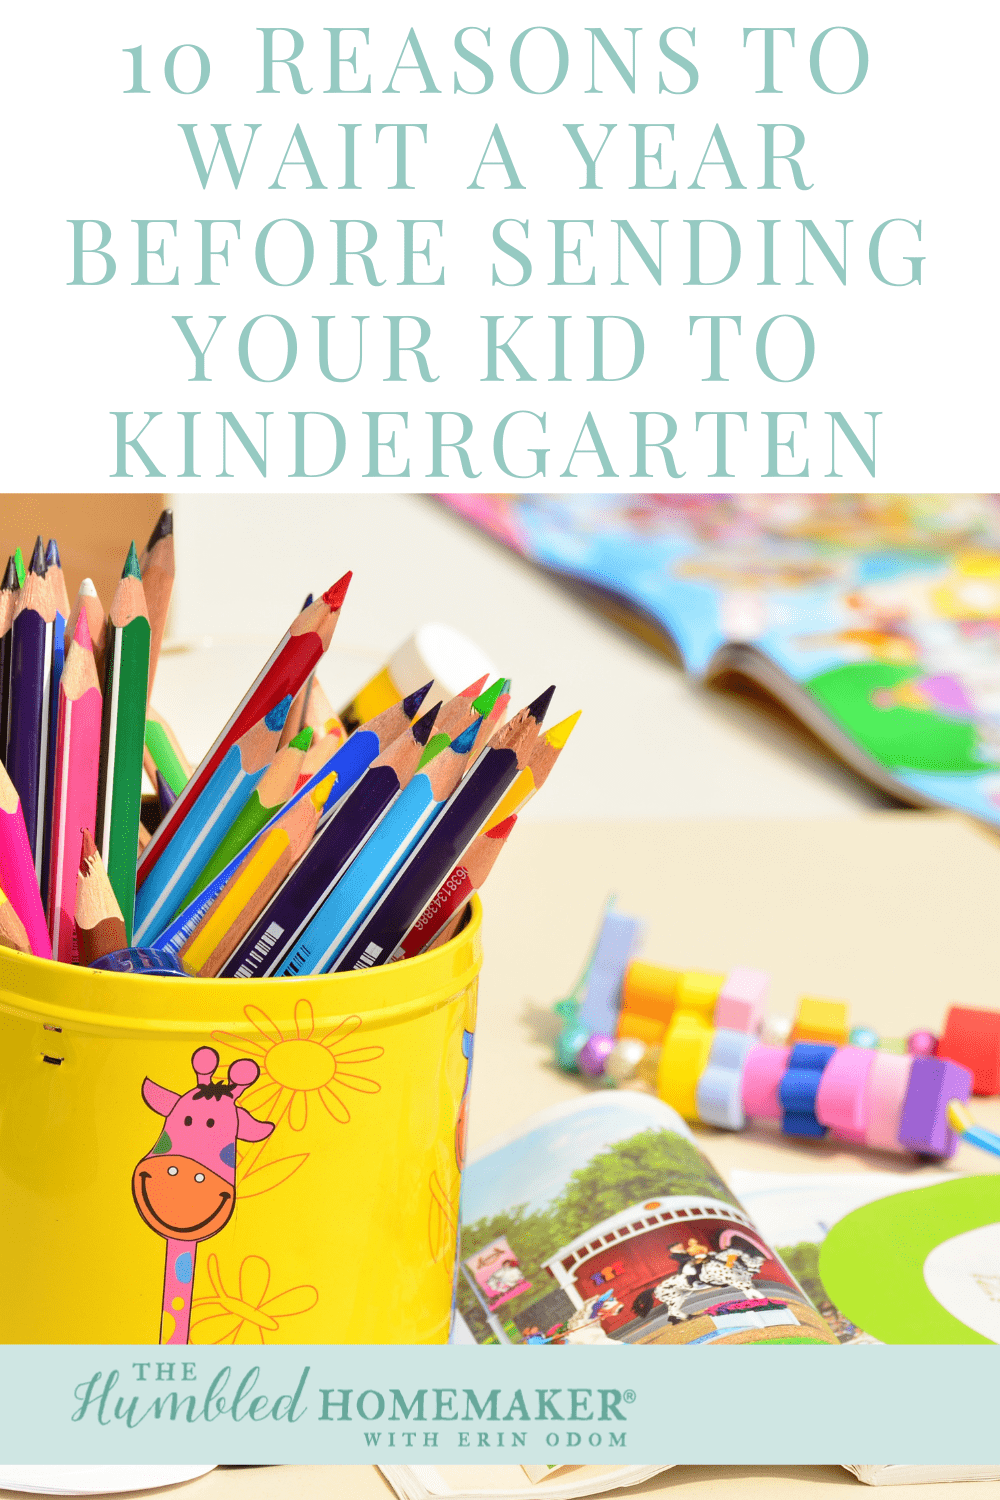 I'm excited to share our family's reasons for why we're not sending our 5 year old to kindergarten, and I'd love for you to also read Lexie's story of how her family chose the opposite--to send their almost-5 year old to kindergarten!